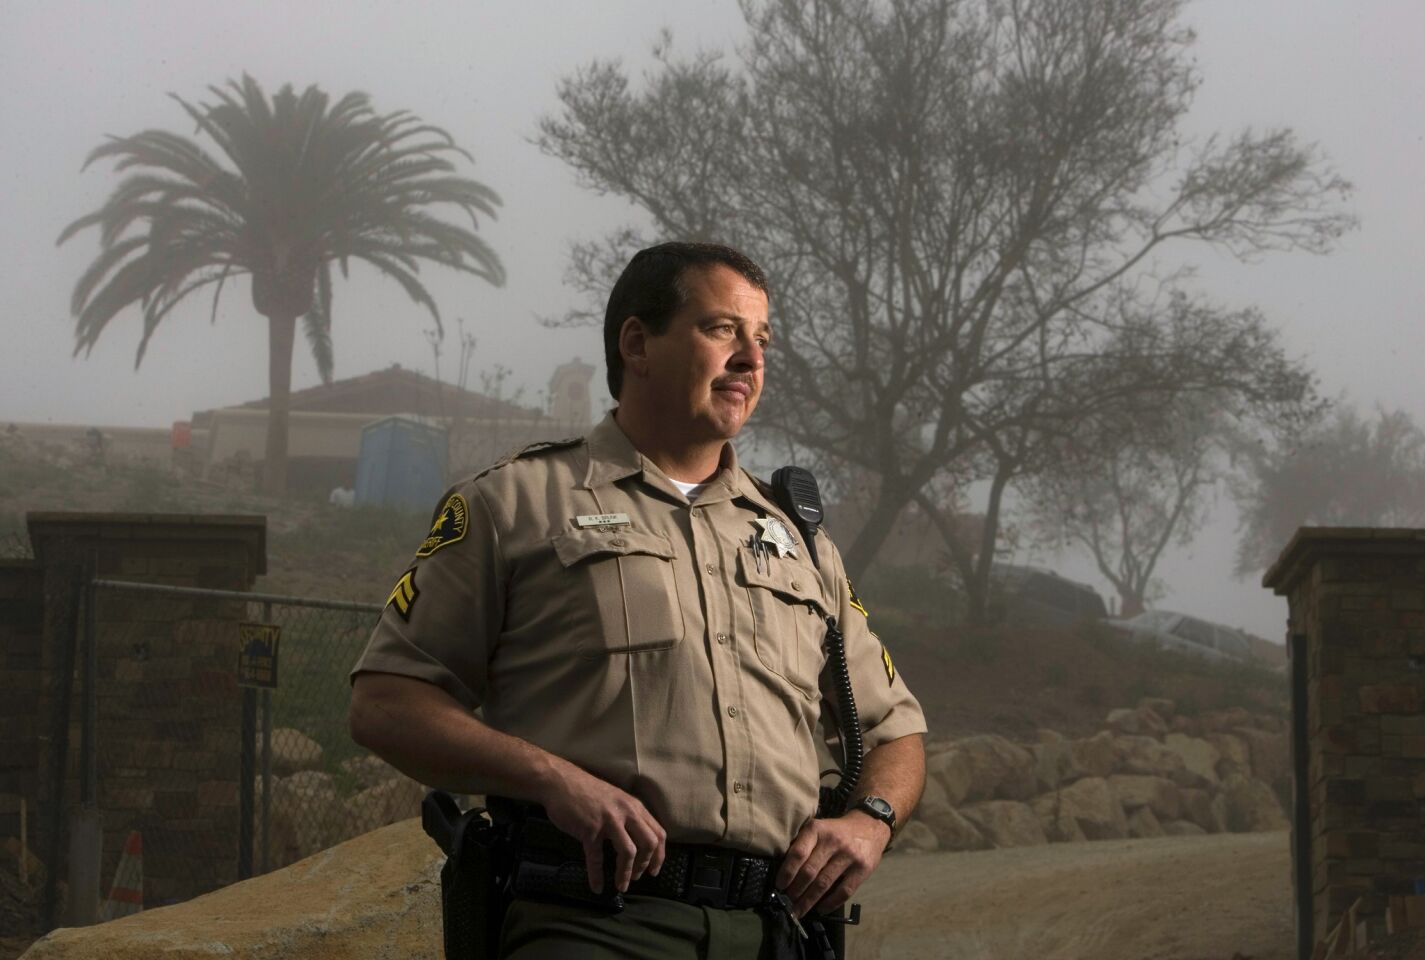 San Diego Sheriff Deputy Robert Brunk stood near the entrance to the property in Rancho Santa Fe where 39 Heaven's Gate members committed mass suicide inside a mansion. Brunk, shown 10 years ago, was the first responder to the call that there was a problem at the house and found room after room of bodies on March 26, 1997. The mansion was razed but a new building was constructed at the site.